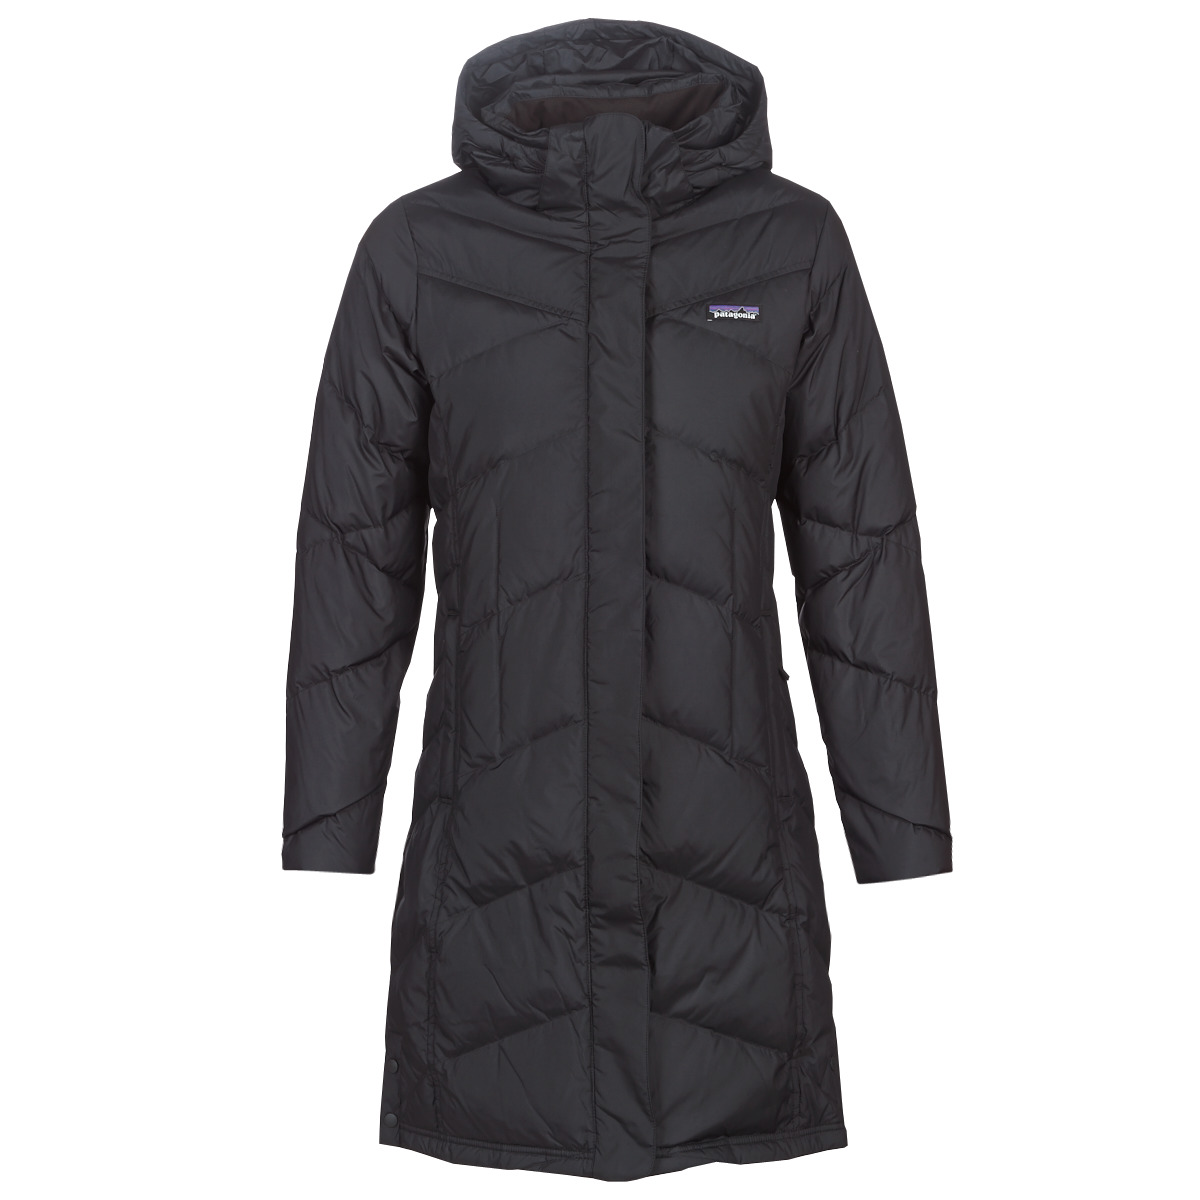 patagonia  w's down with it parka  women's jacket in black